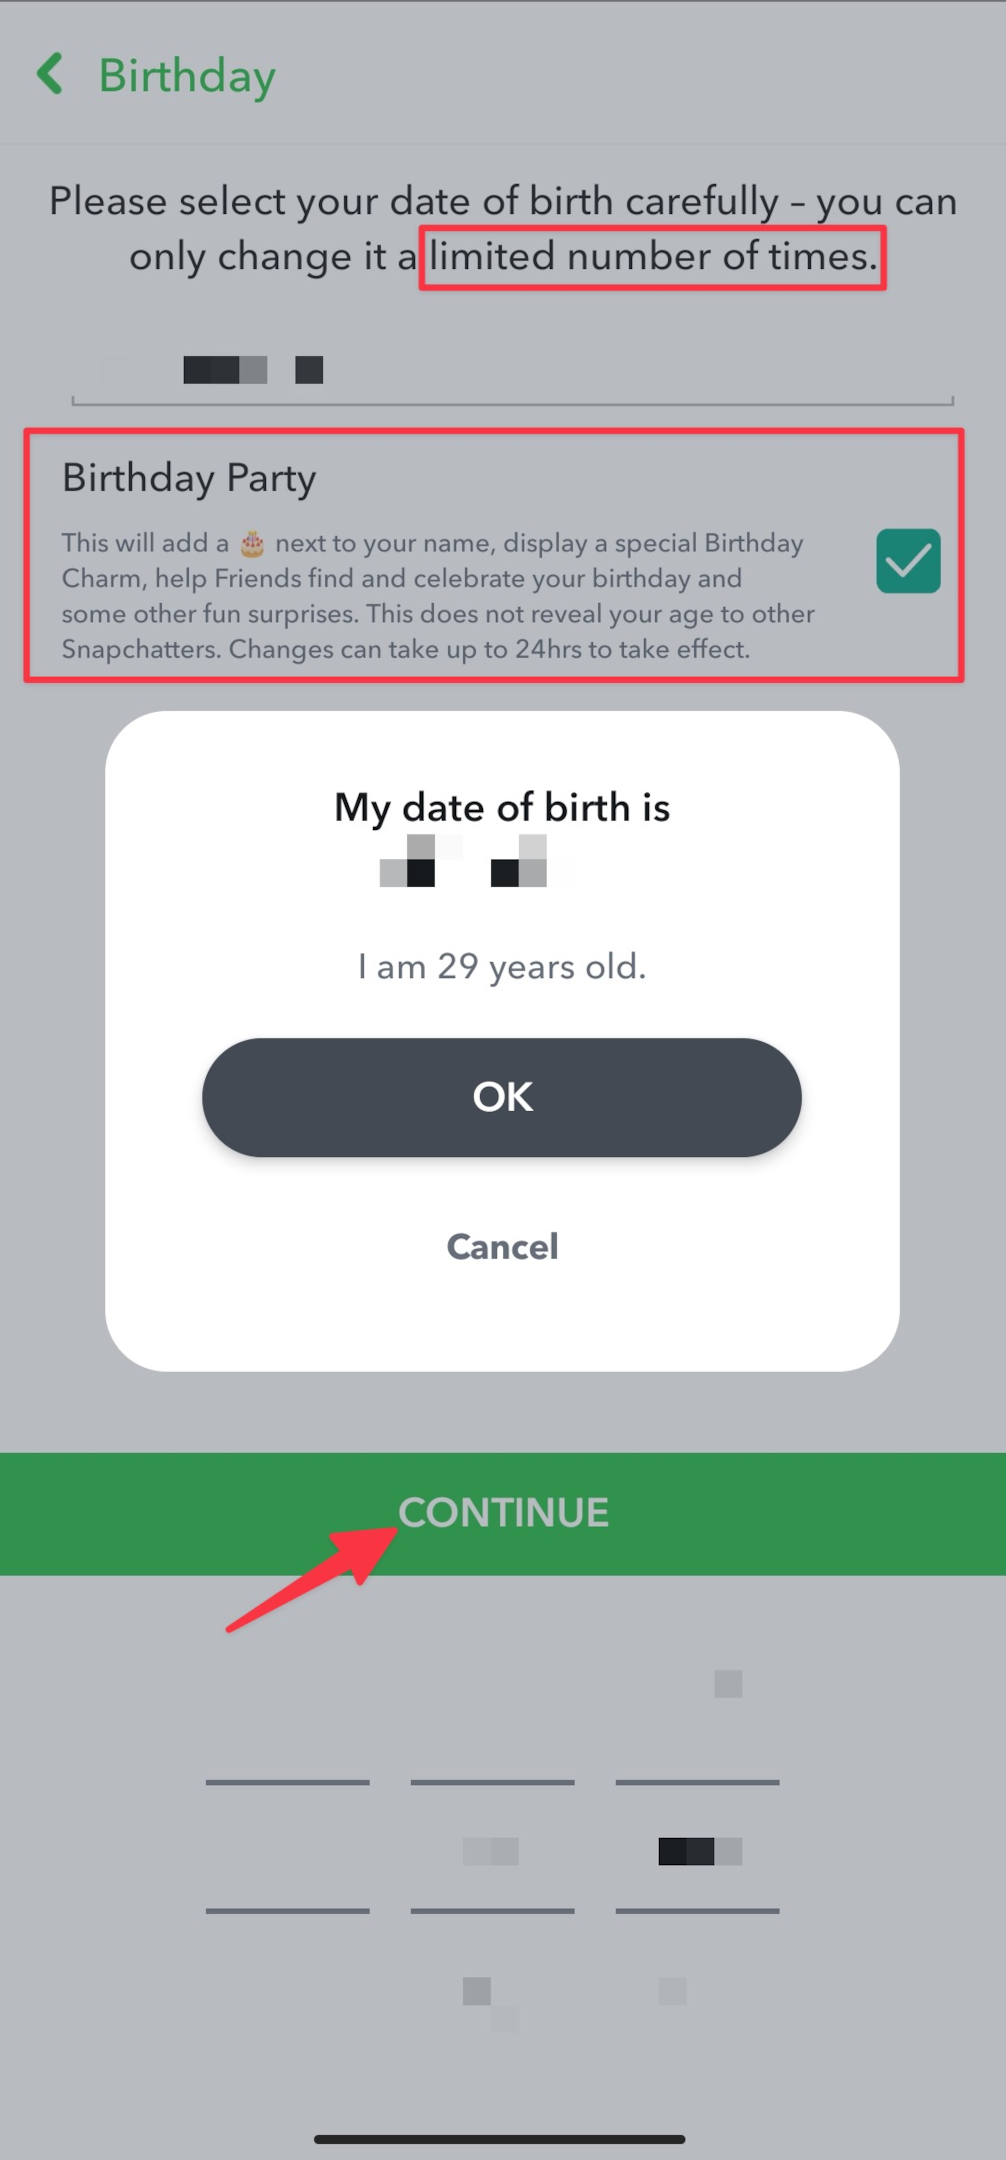 Remote.tools shows the confirmation popup to change your Birthday (along with the birth year) on Snapchat